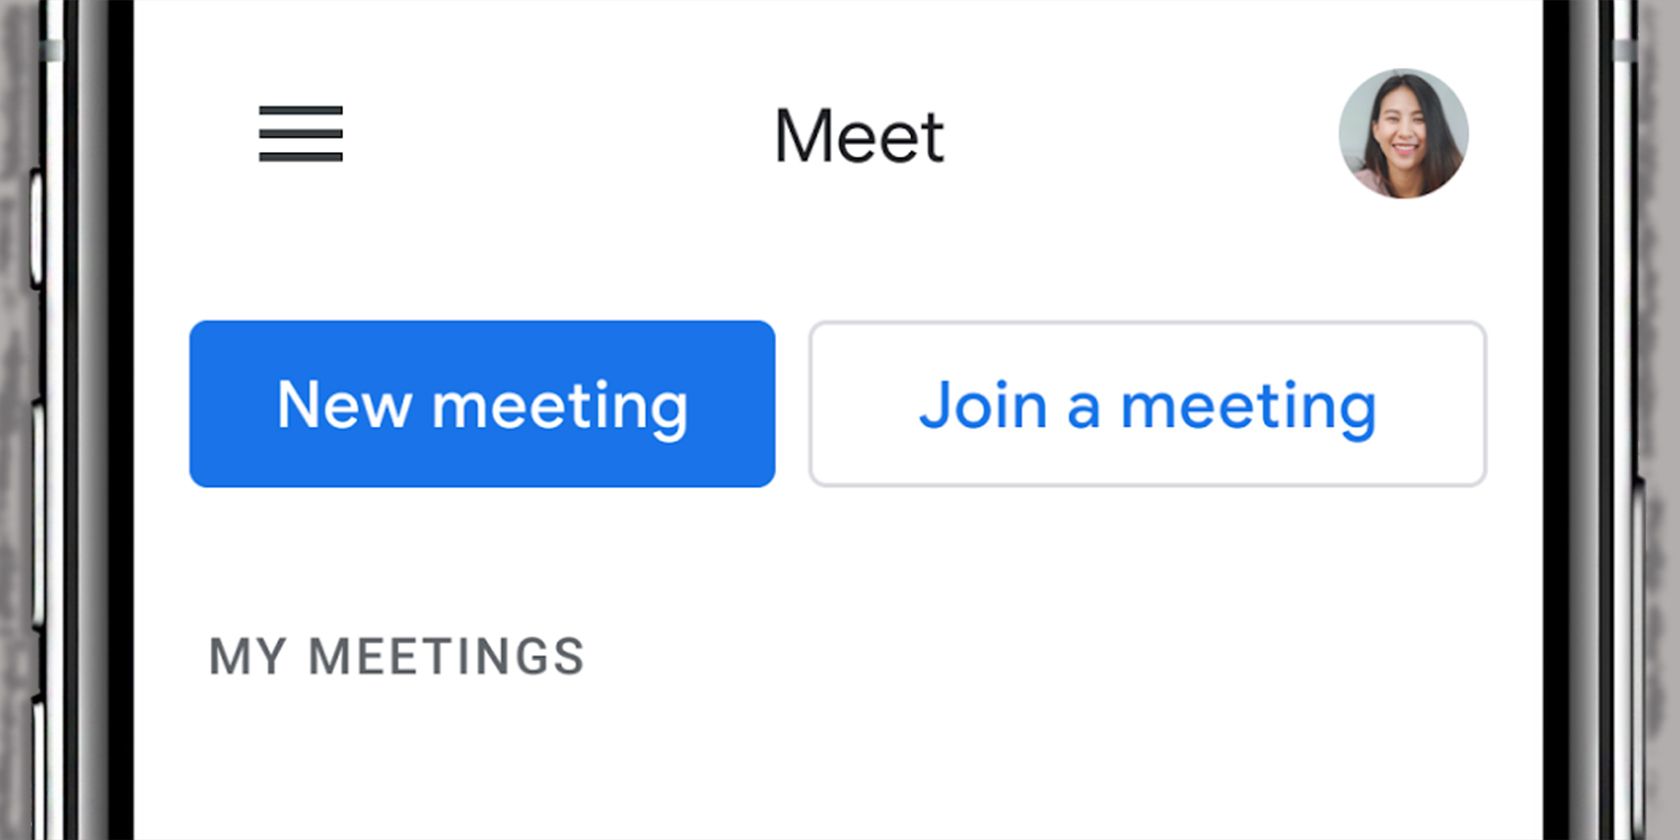 Google Updates the Look and Feel of Meet Mobile Apps